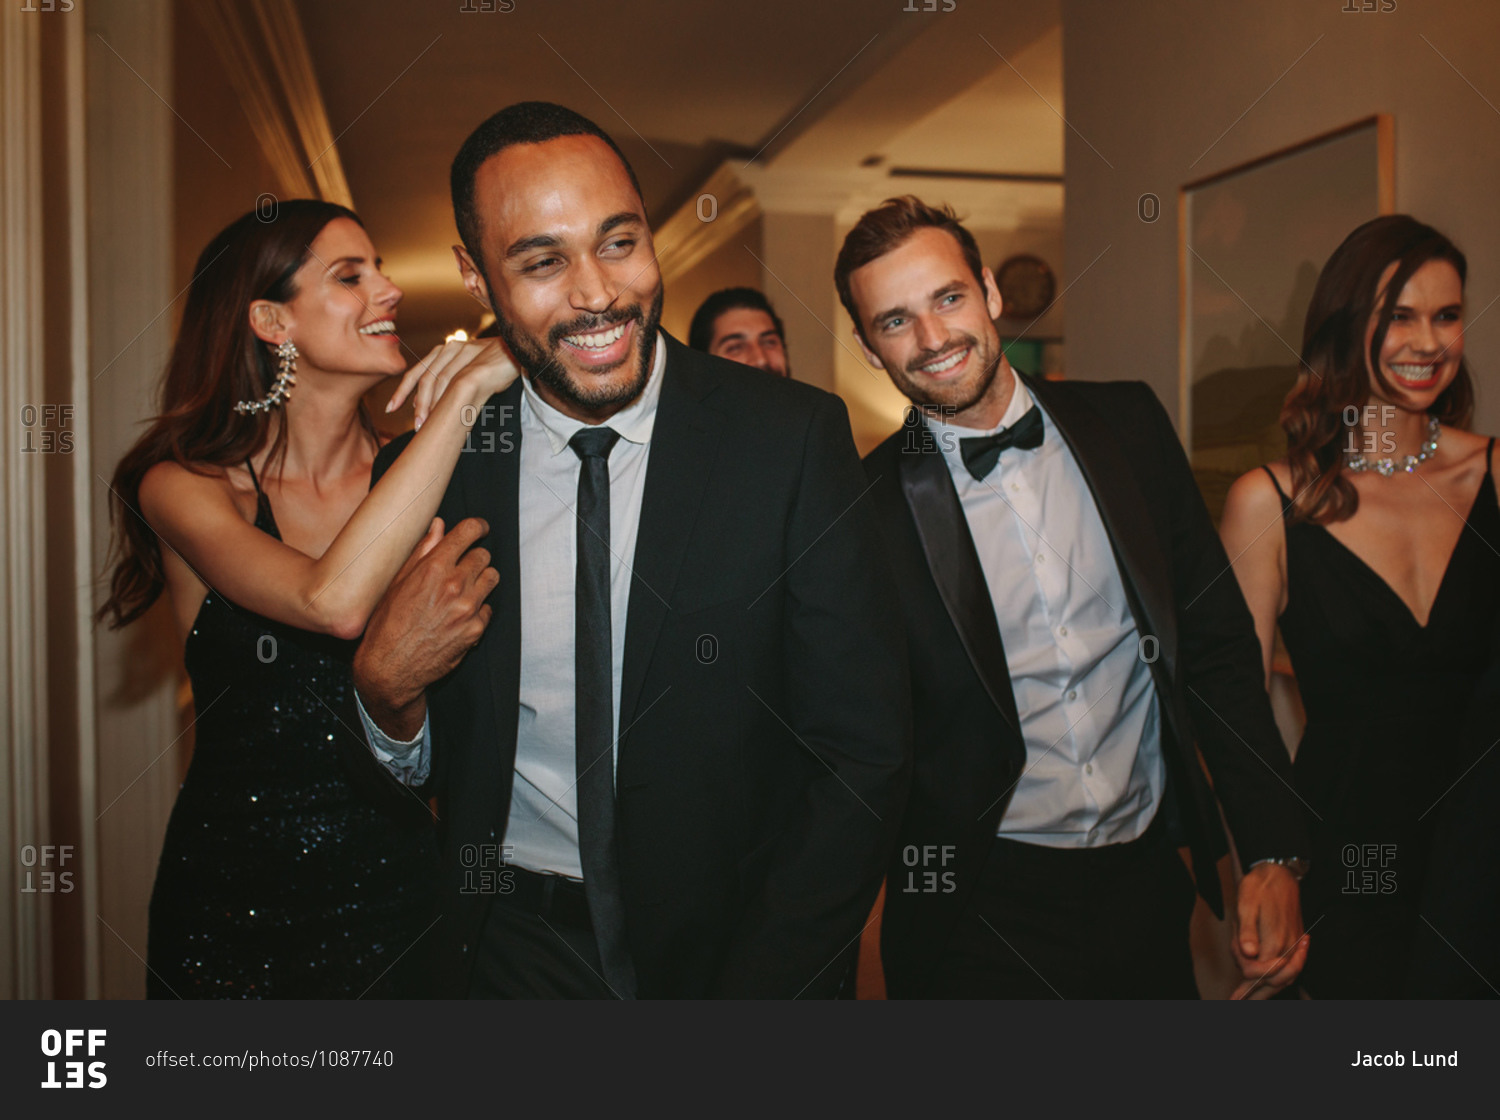 Diverse group of people at a party. Multi-ethnic friends having fun together at a gala event.